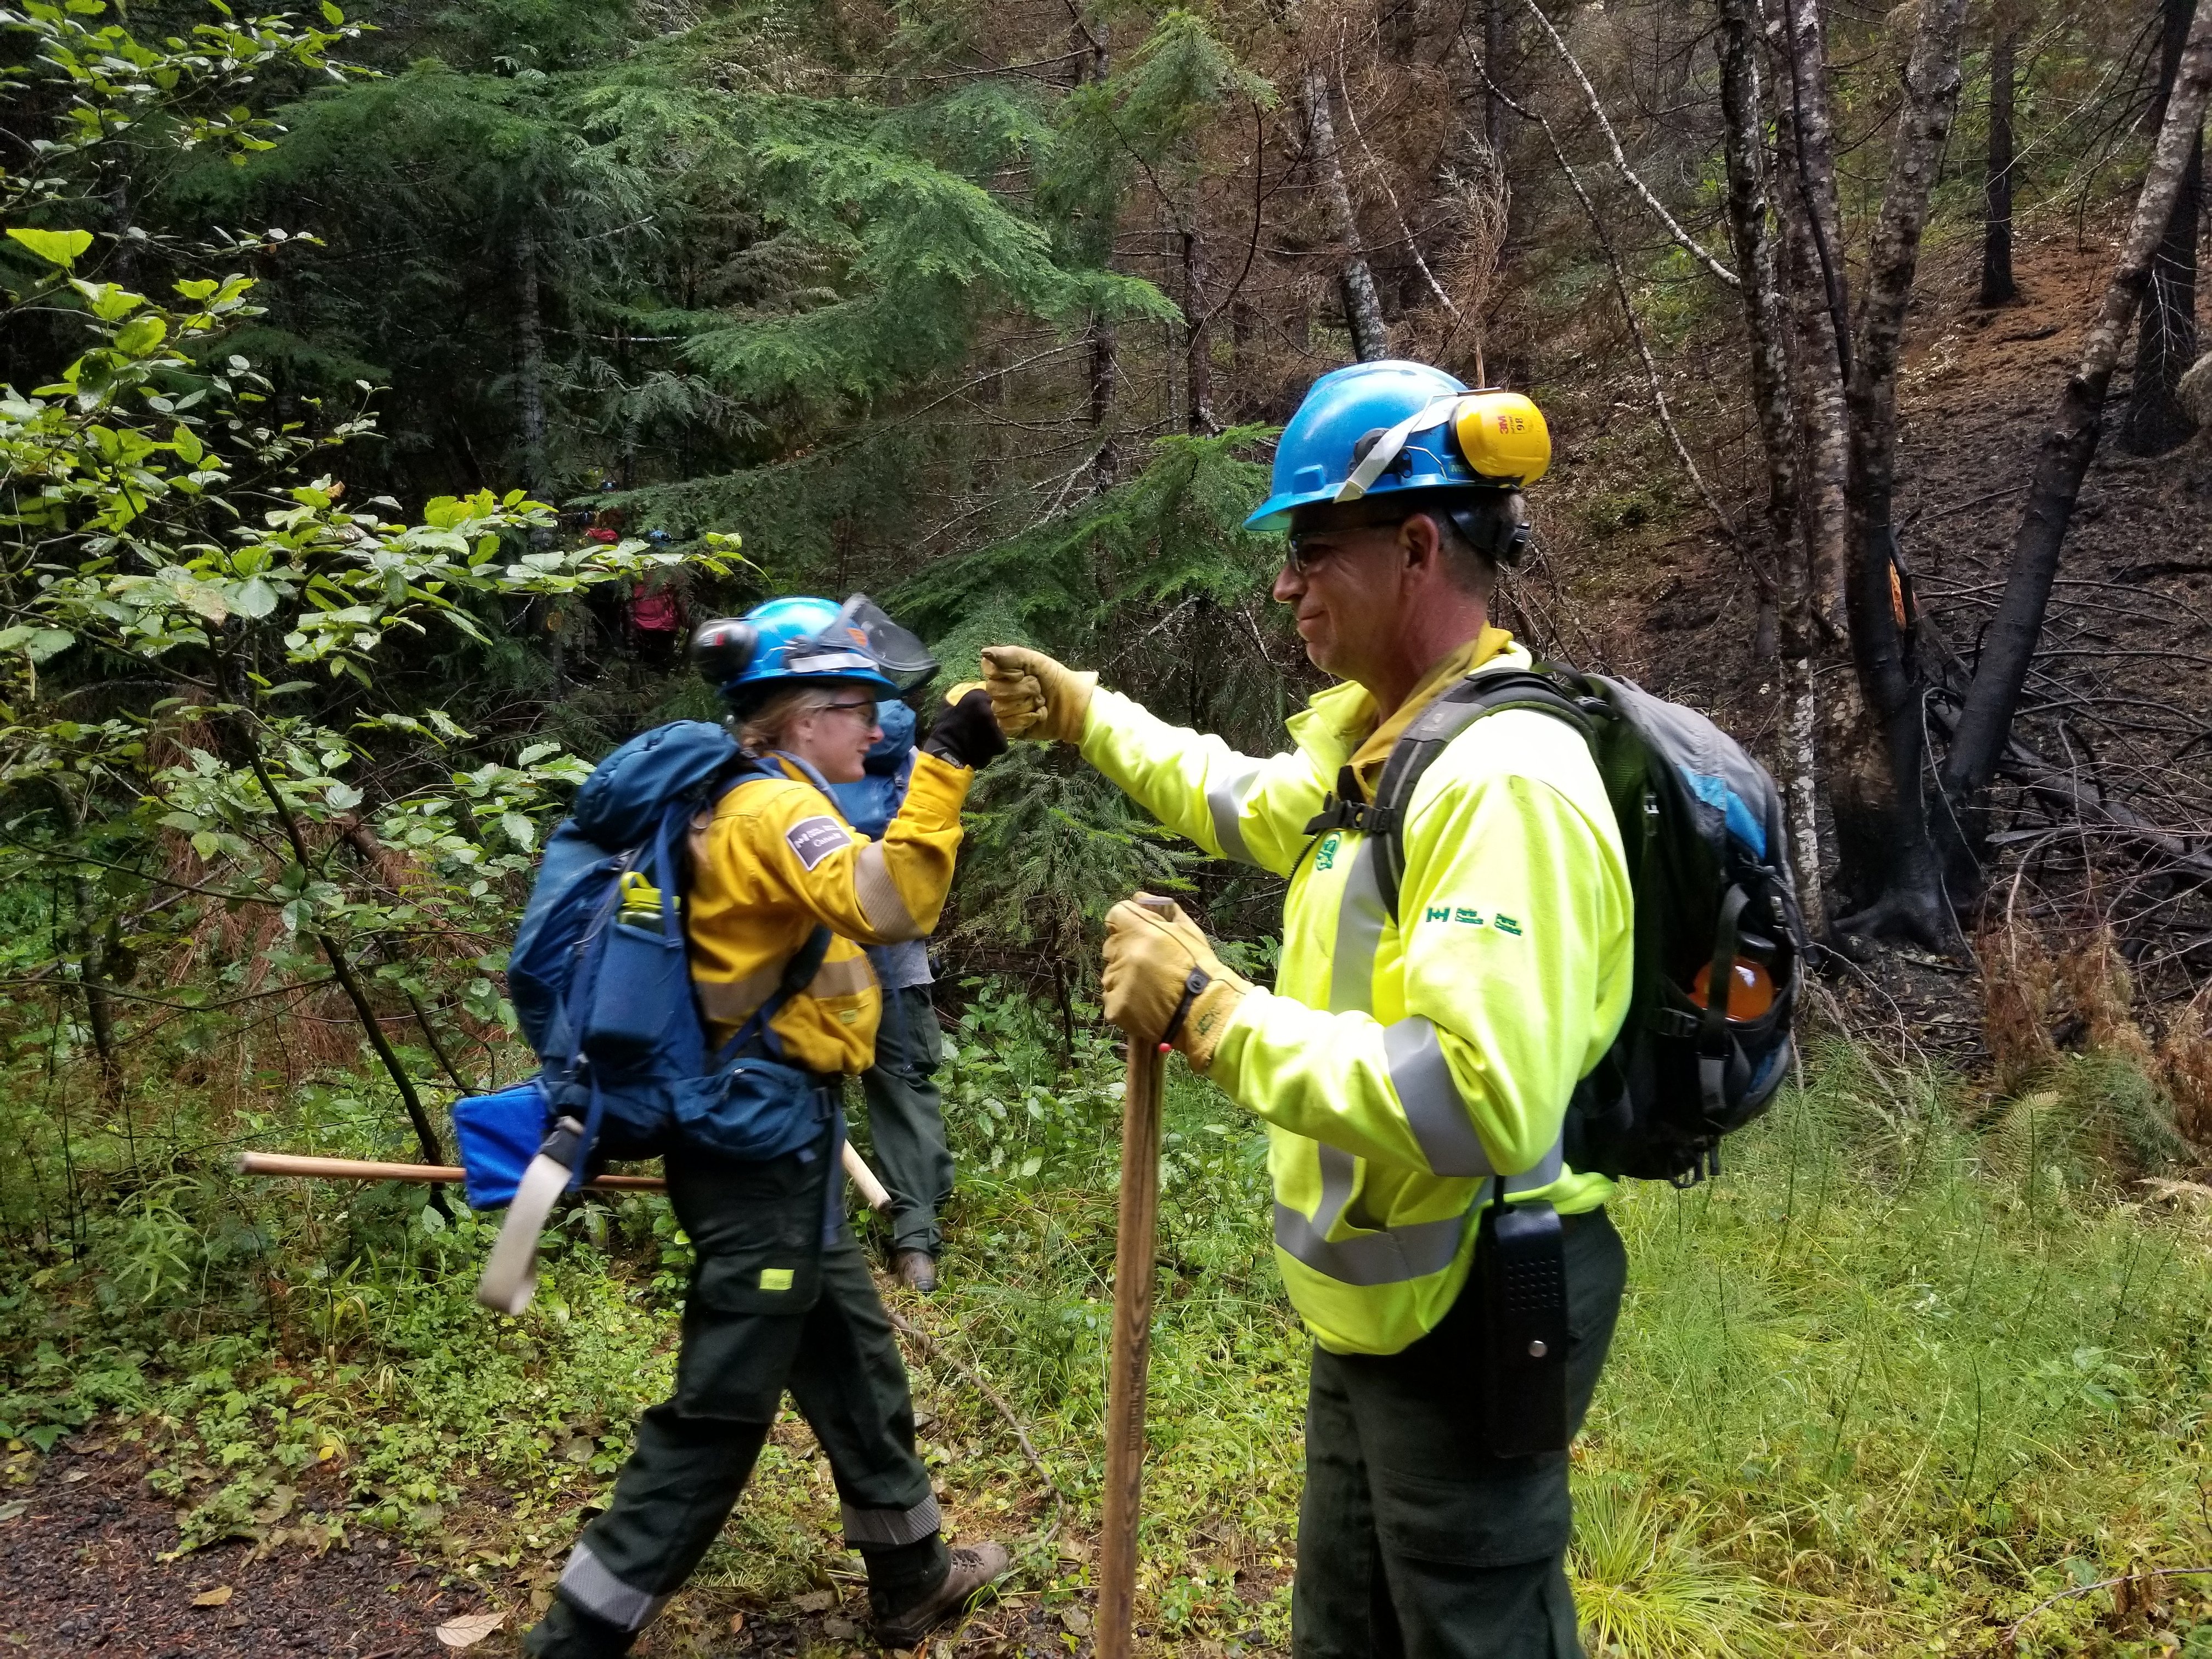 parks canada fire management team members deployed to western us